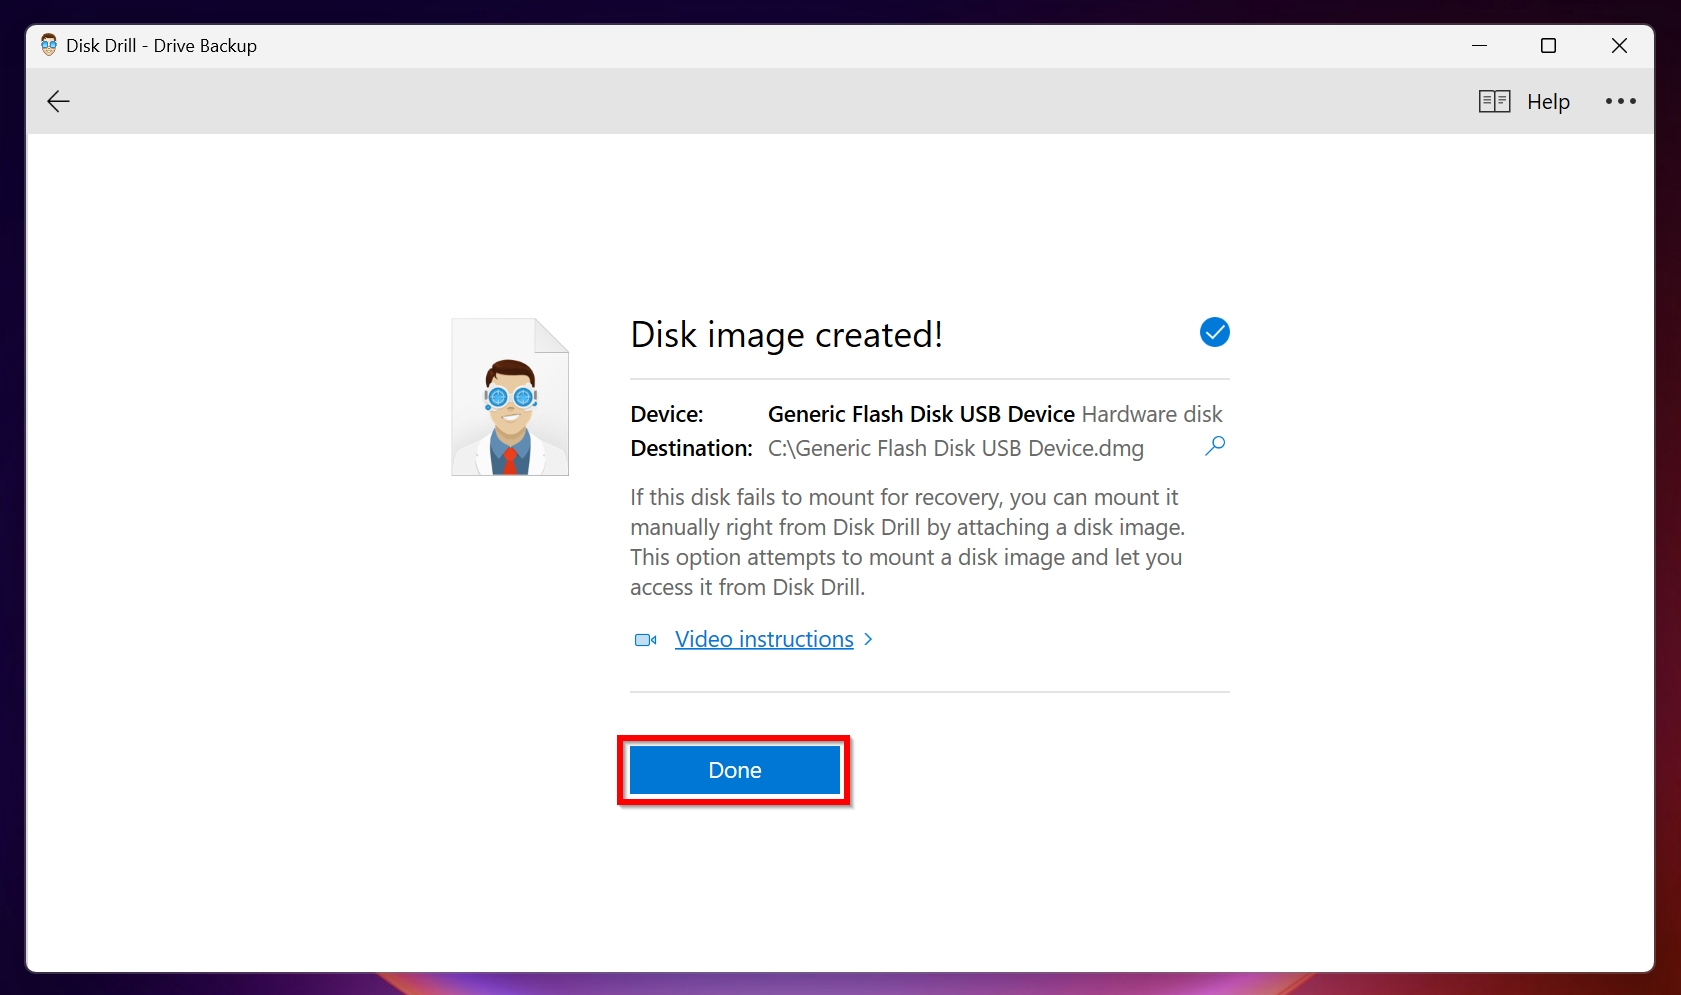 Disk image created screen.